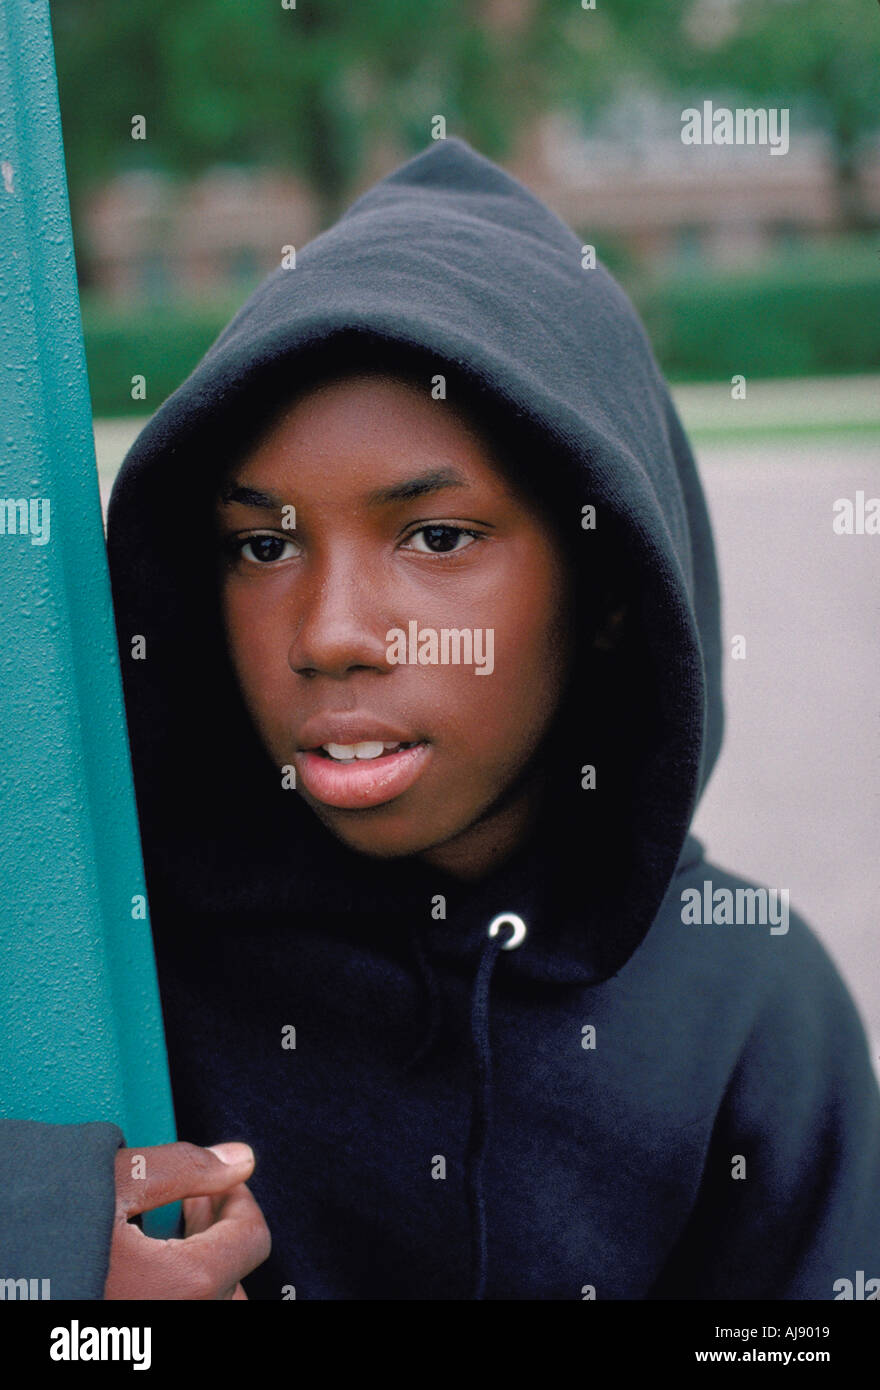 African American teen age 13 standing by a street sign wearing a hooded sweat shirt. St Paul Minnesota USA Stock Photo